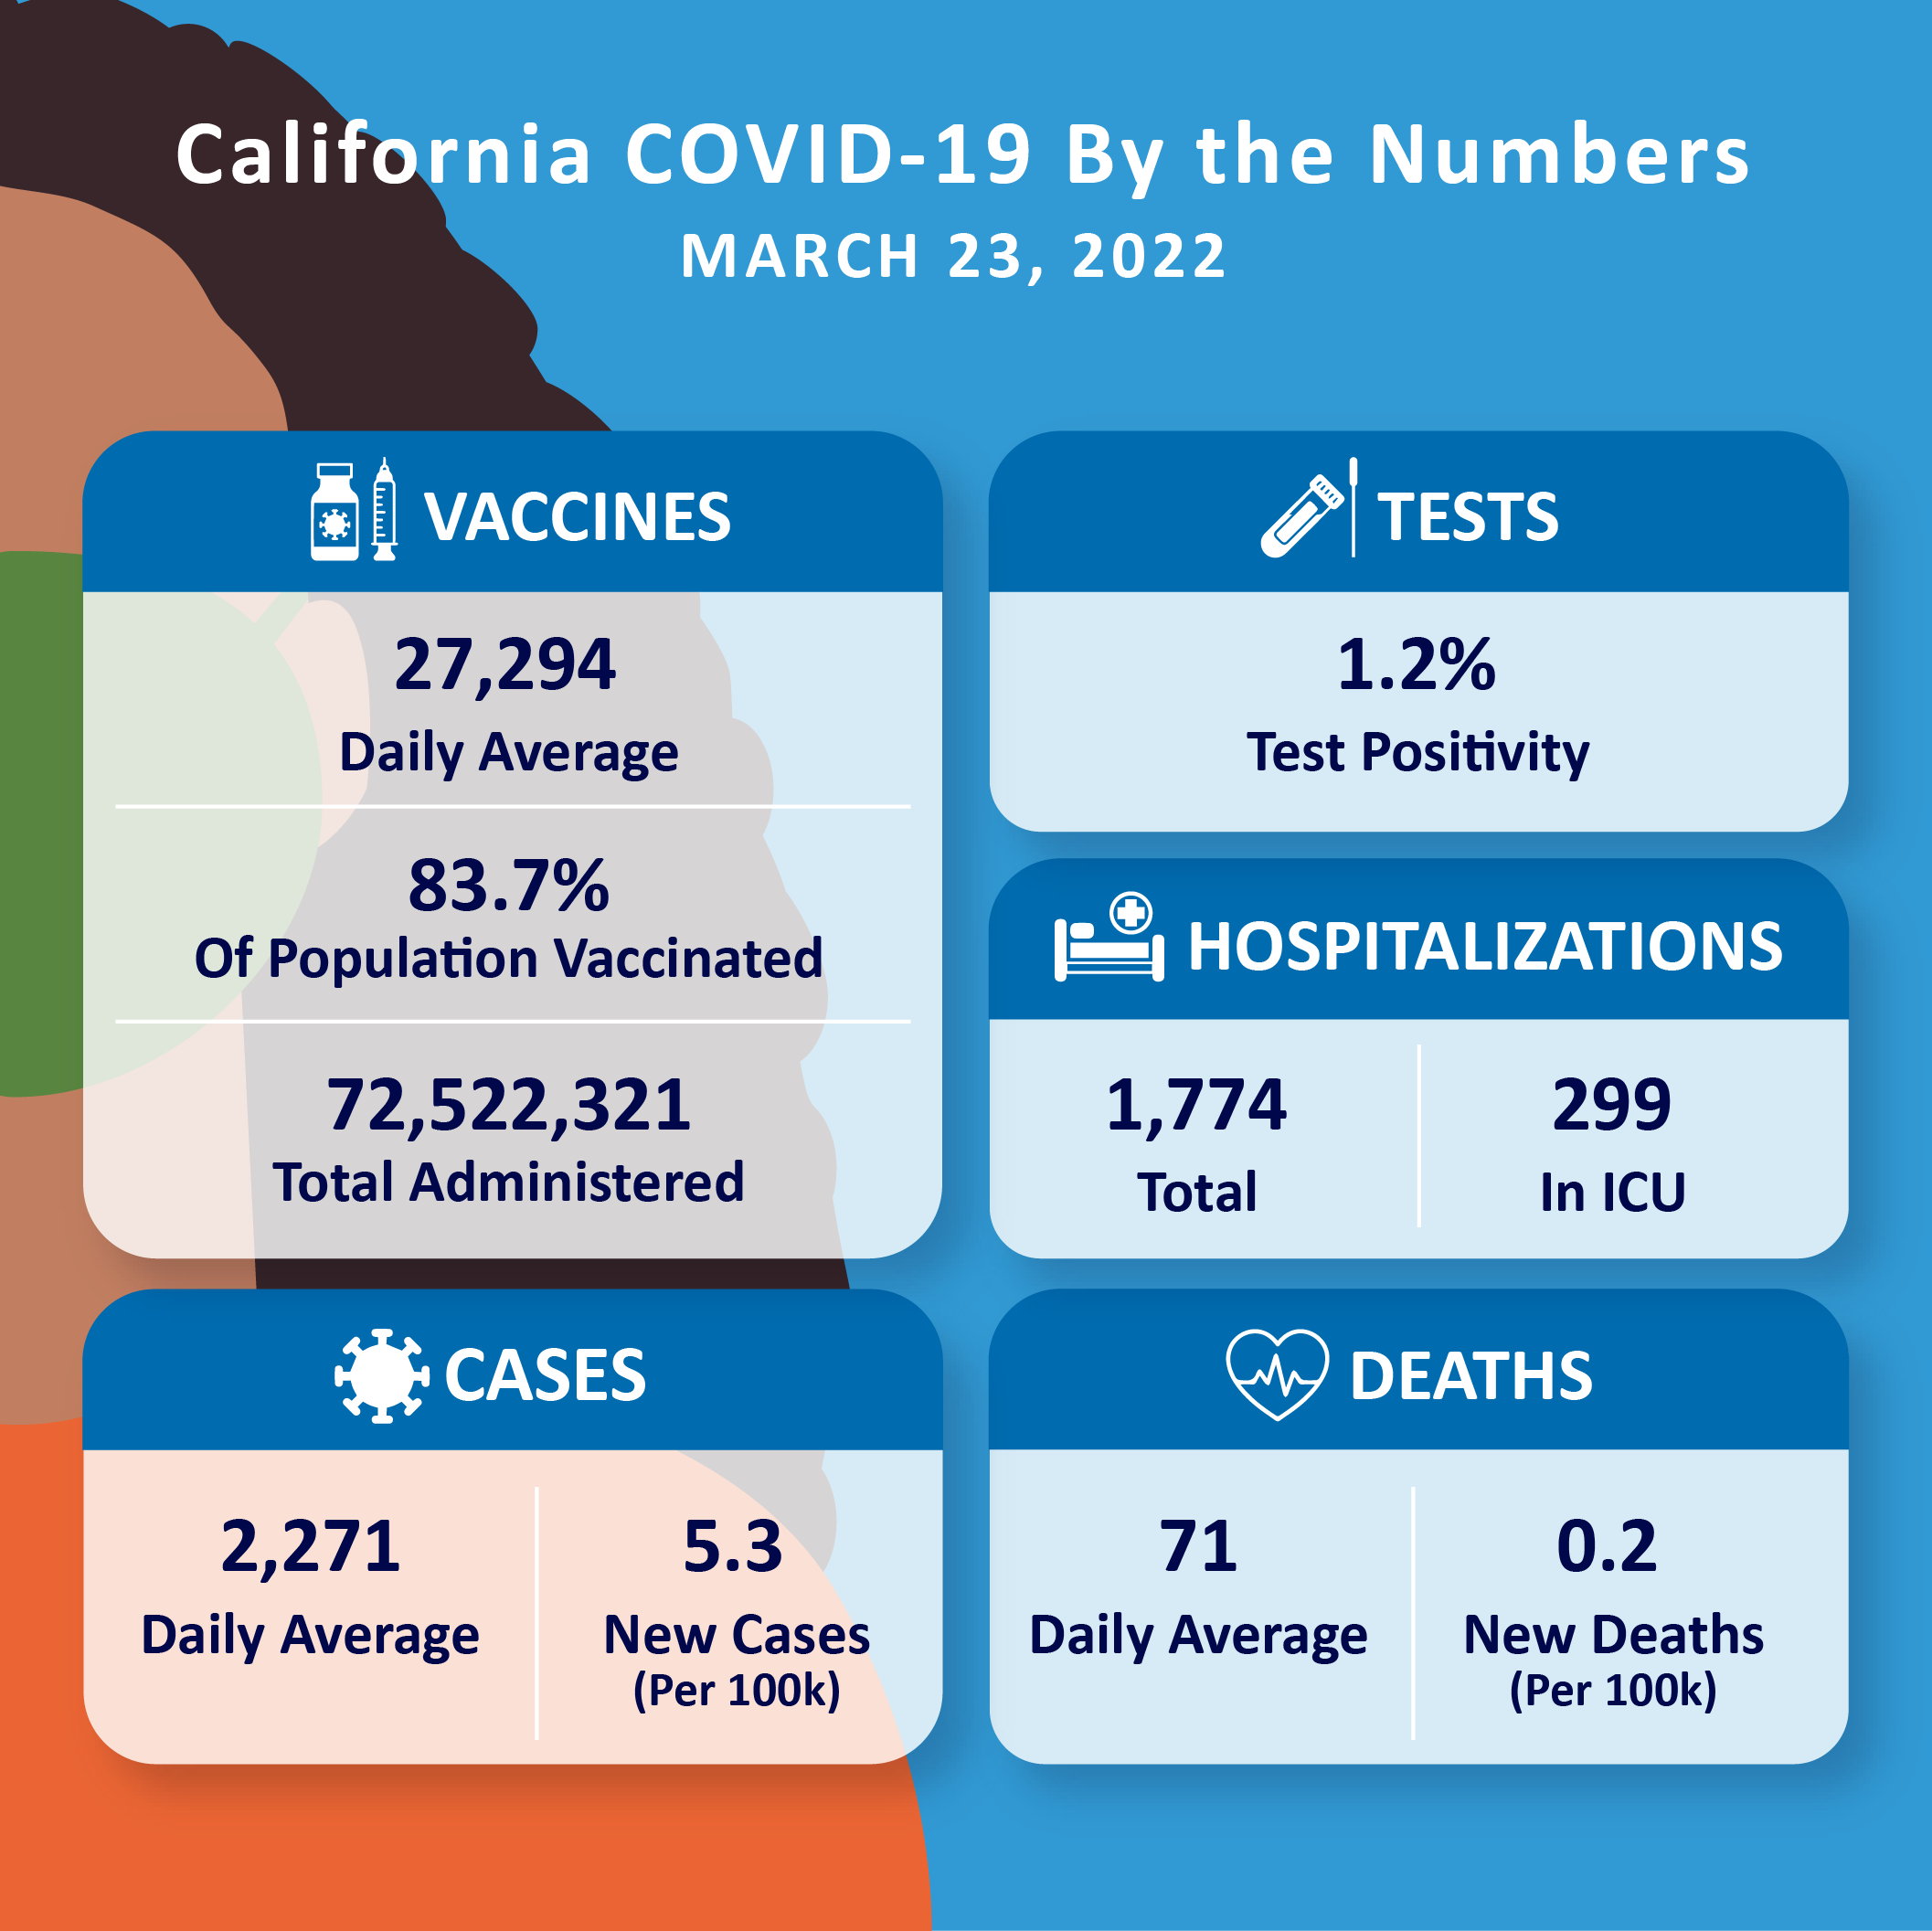 CA COVID-19 by the numbers March 23, 2022